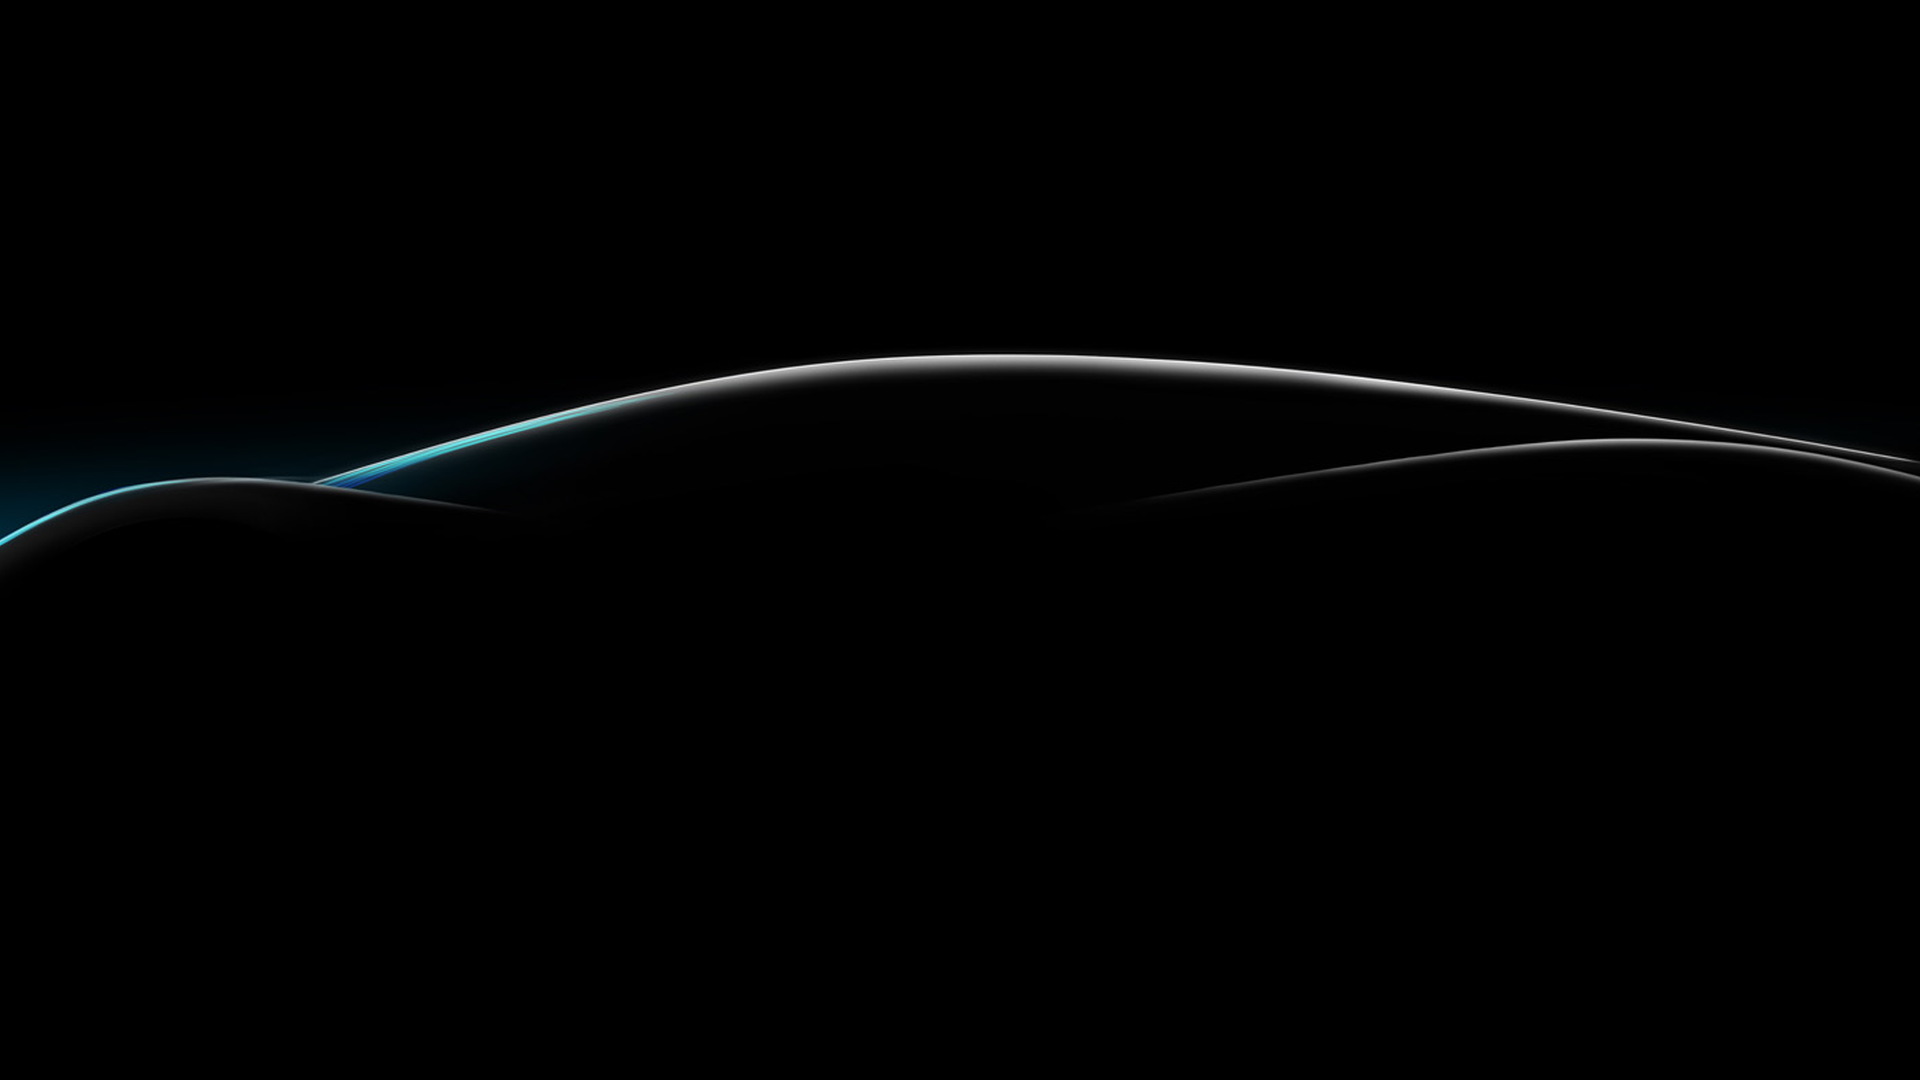 Teaser for Techrules GT96 debuting at 2017 Geneva auto show